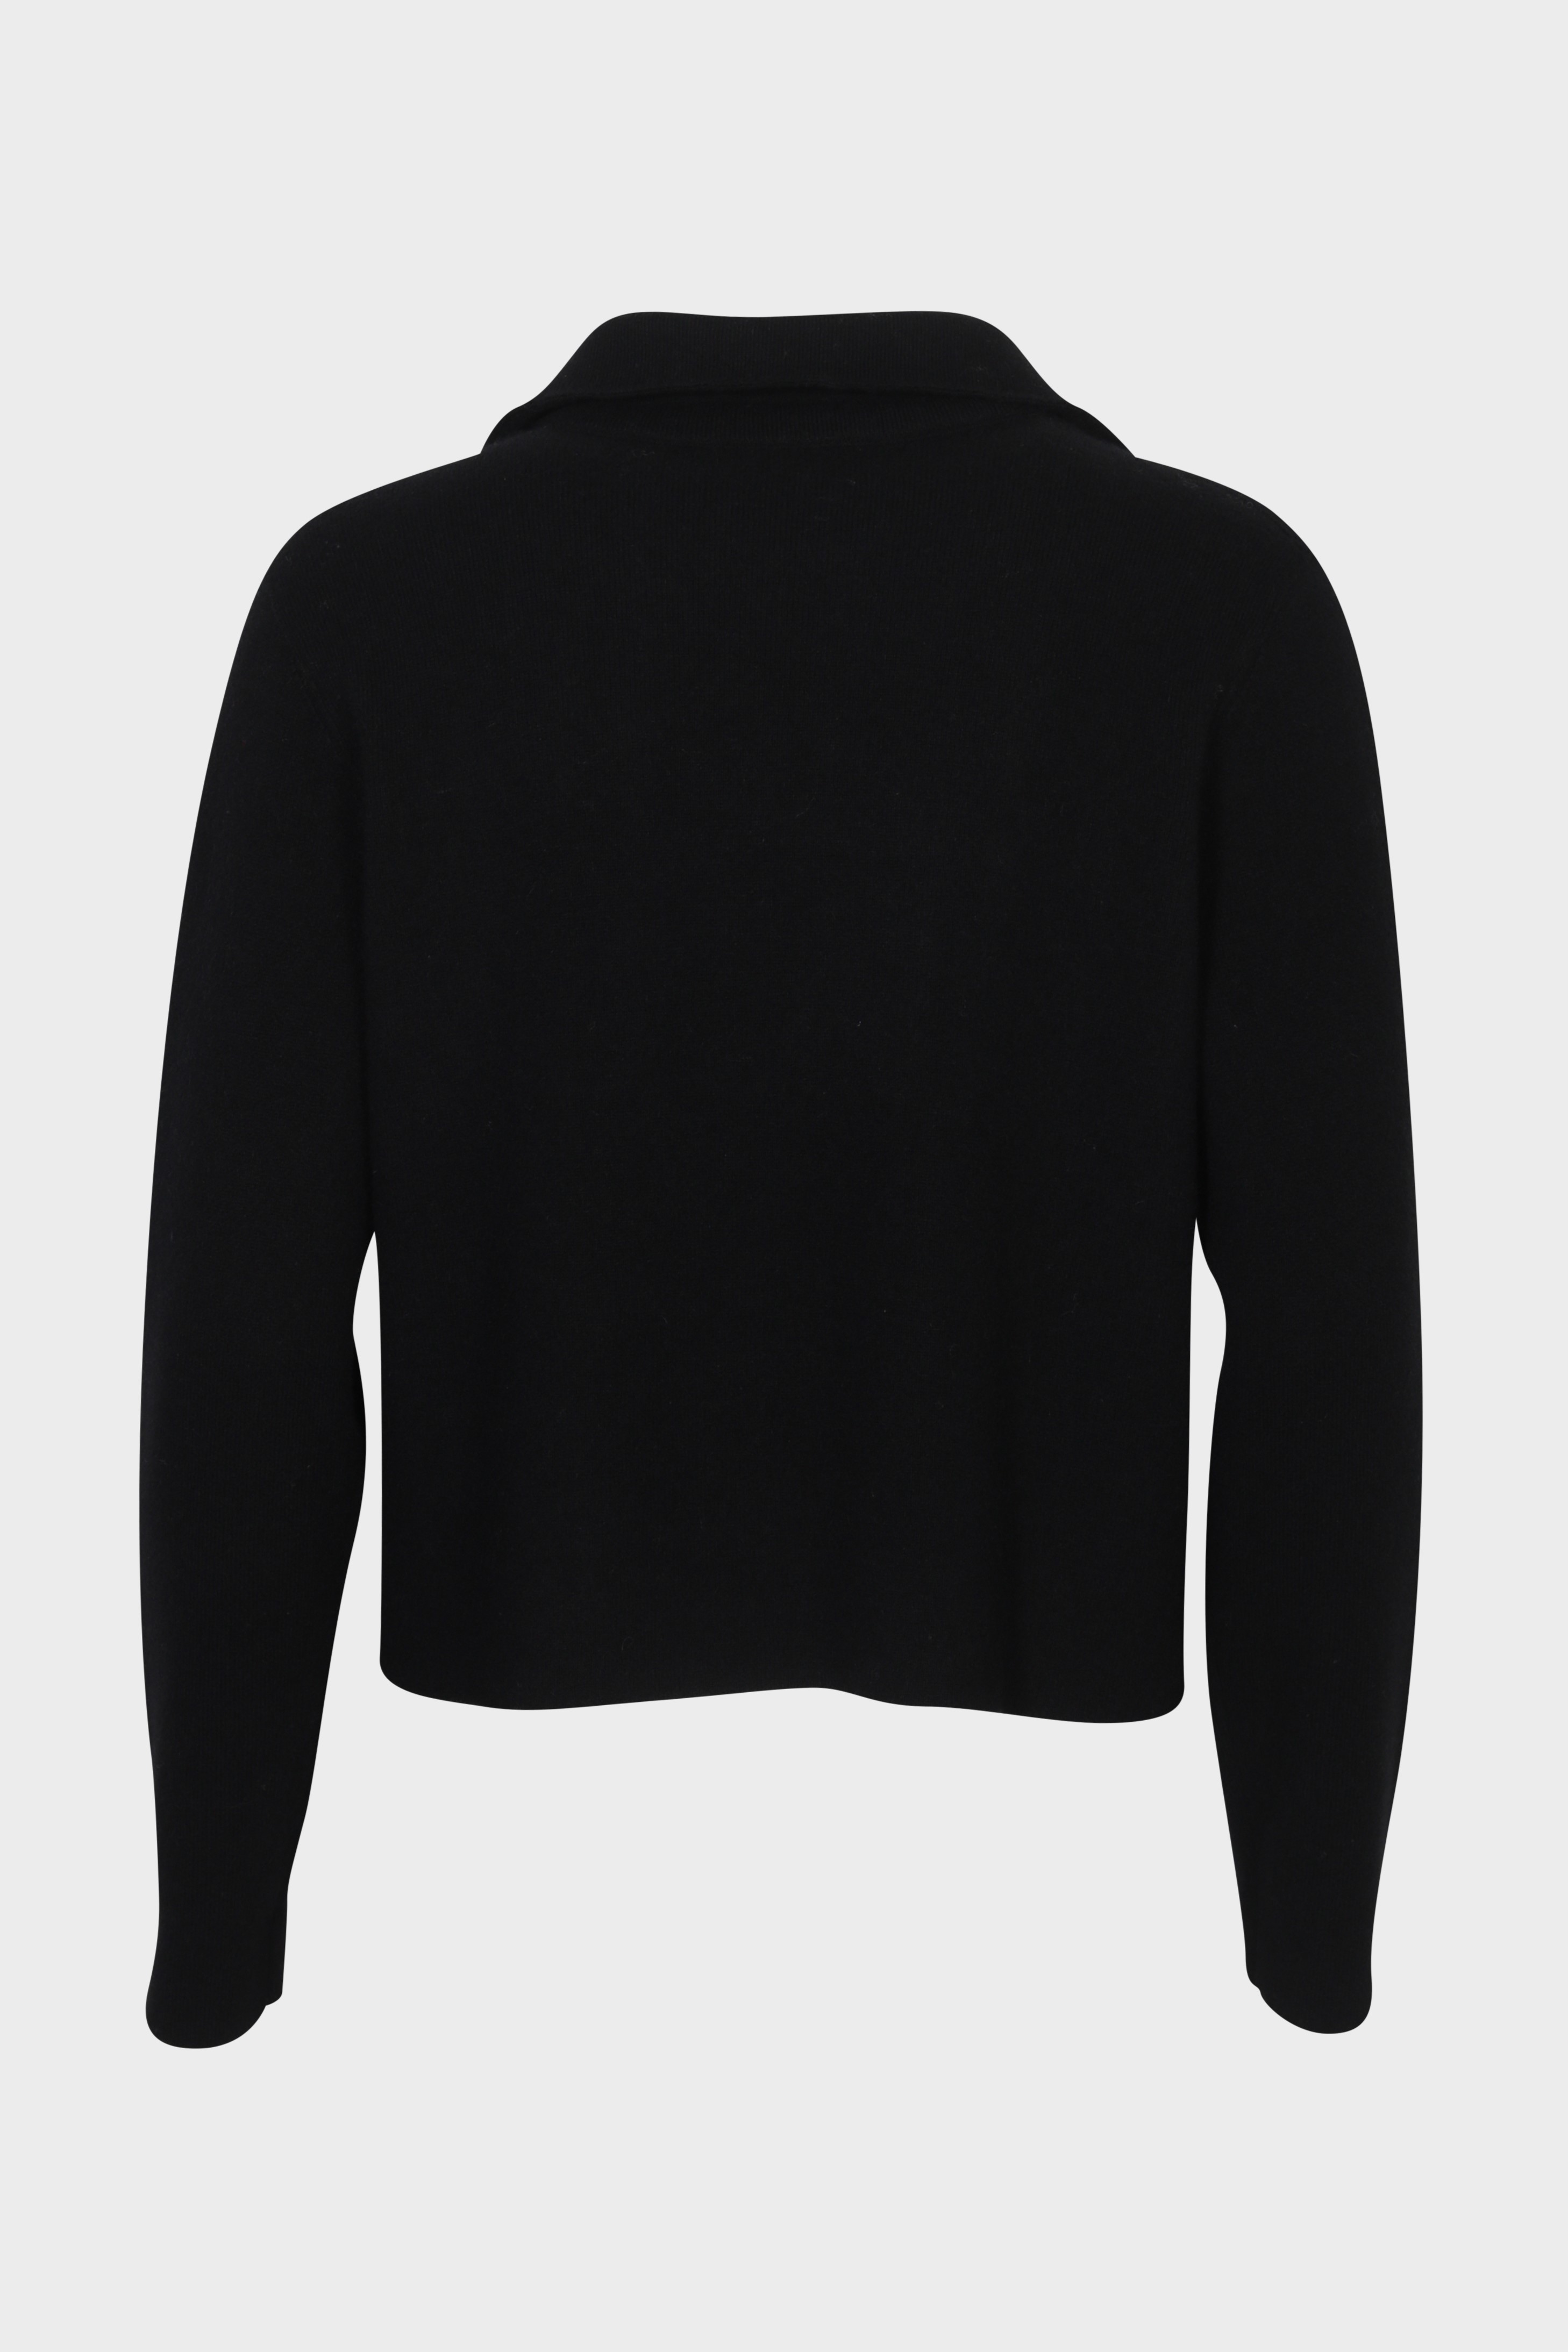 SMINFINITY Chilly Cropped Knit Jacket in Black XS